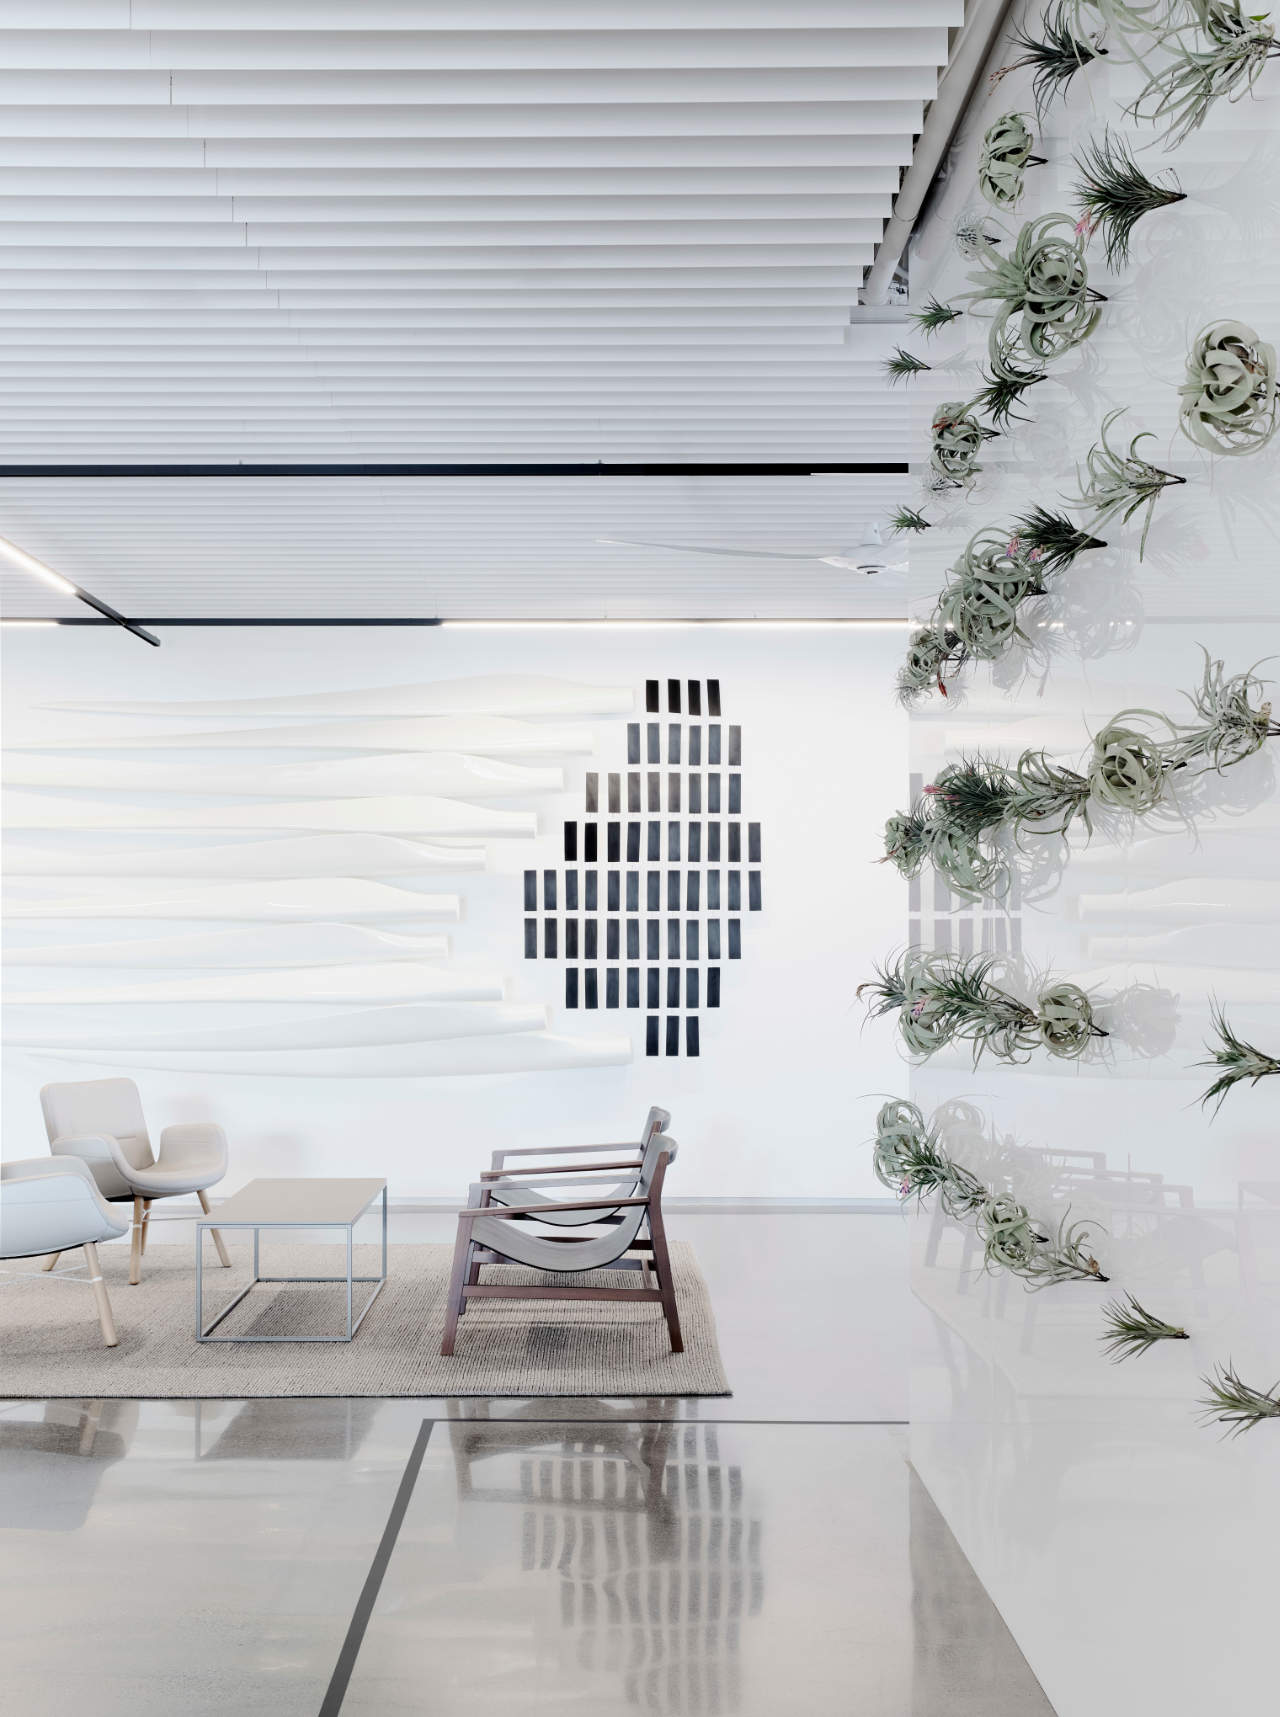 Eolian Energy Headquarters by Axelrod Design